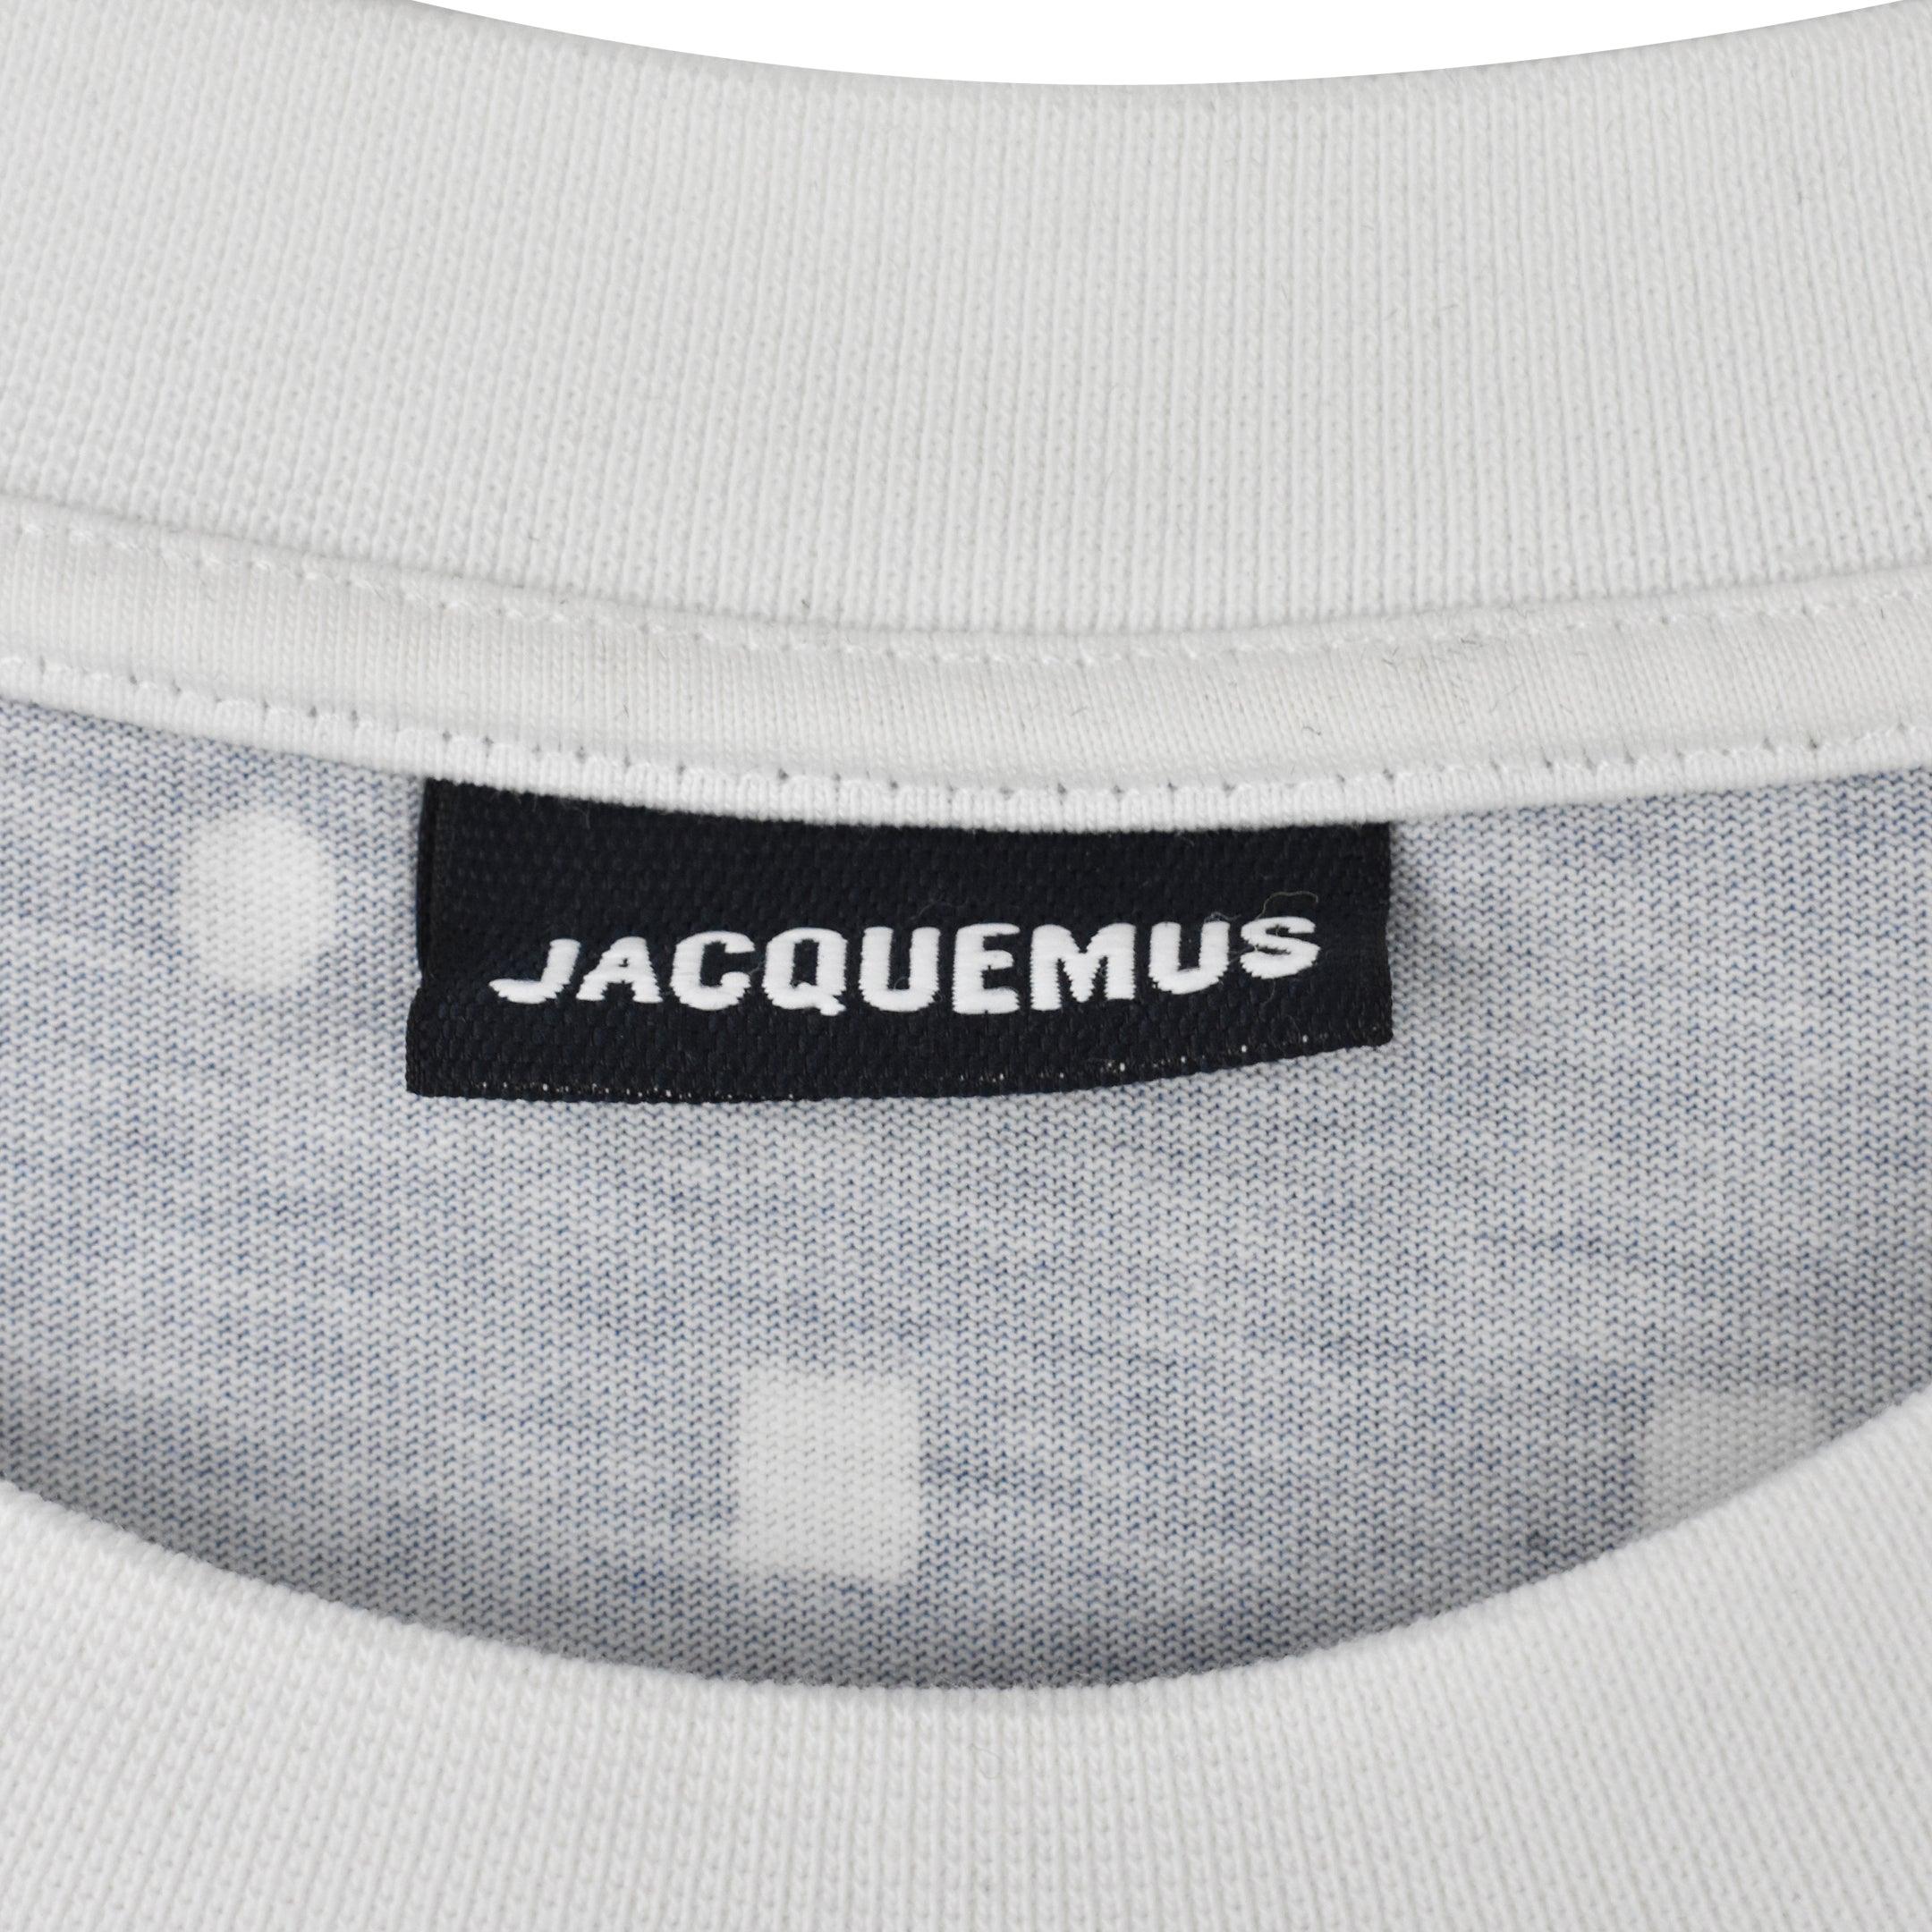 Jacquemus T-Shirt - Men's S - Fashionably Yours